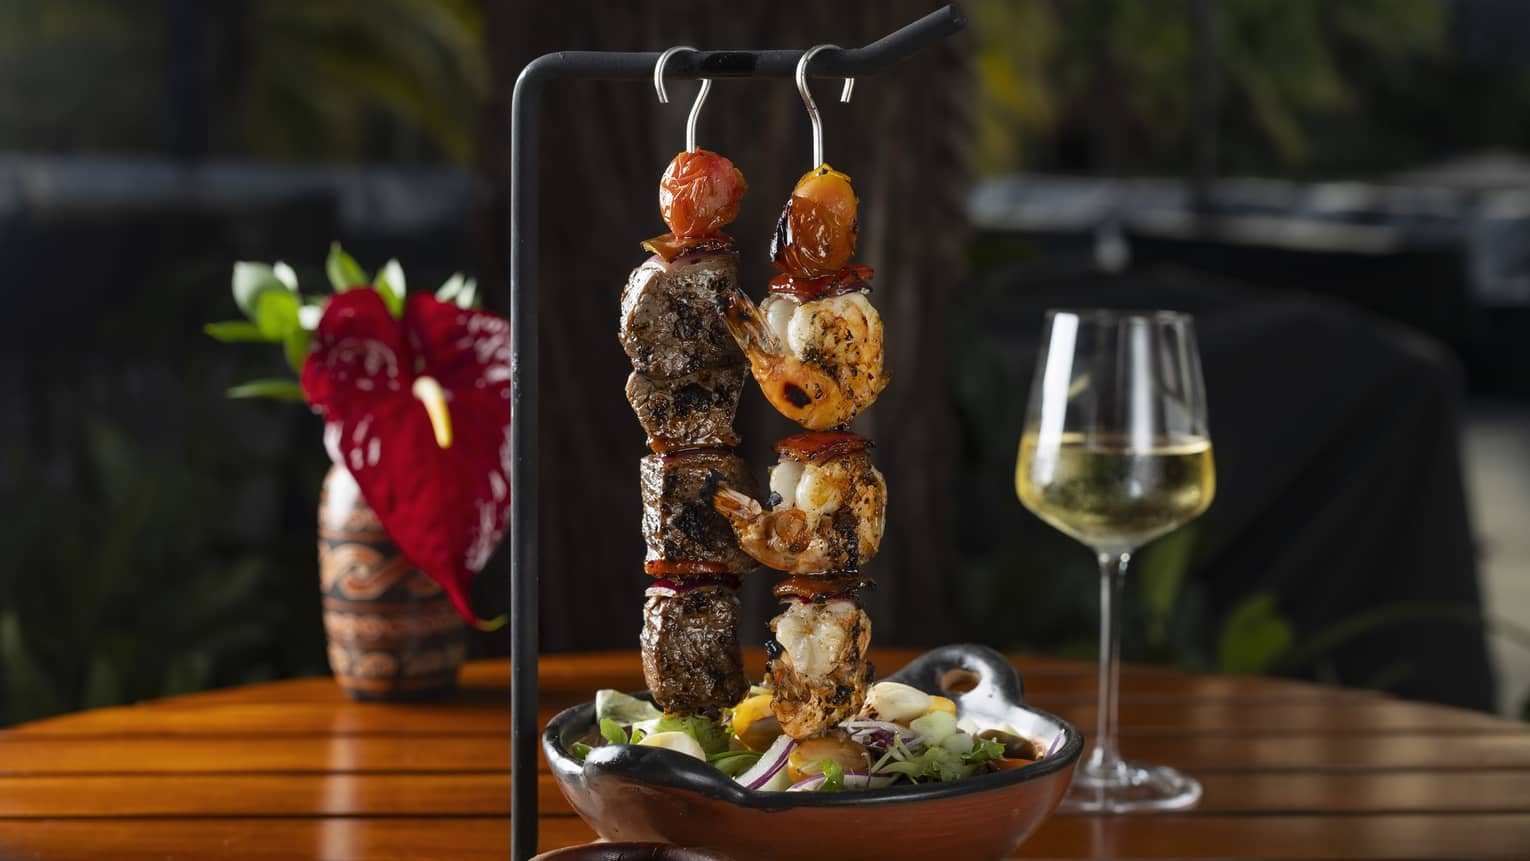 One shrimp skewer and one beef tenderloin skewer hang from a black serving bar next to a clay bowl filled with salad and a glass of white wine in the background